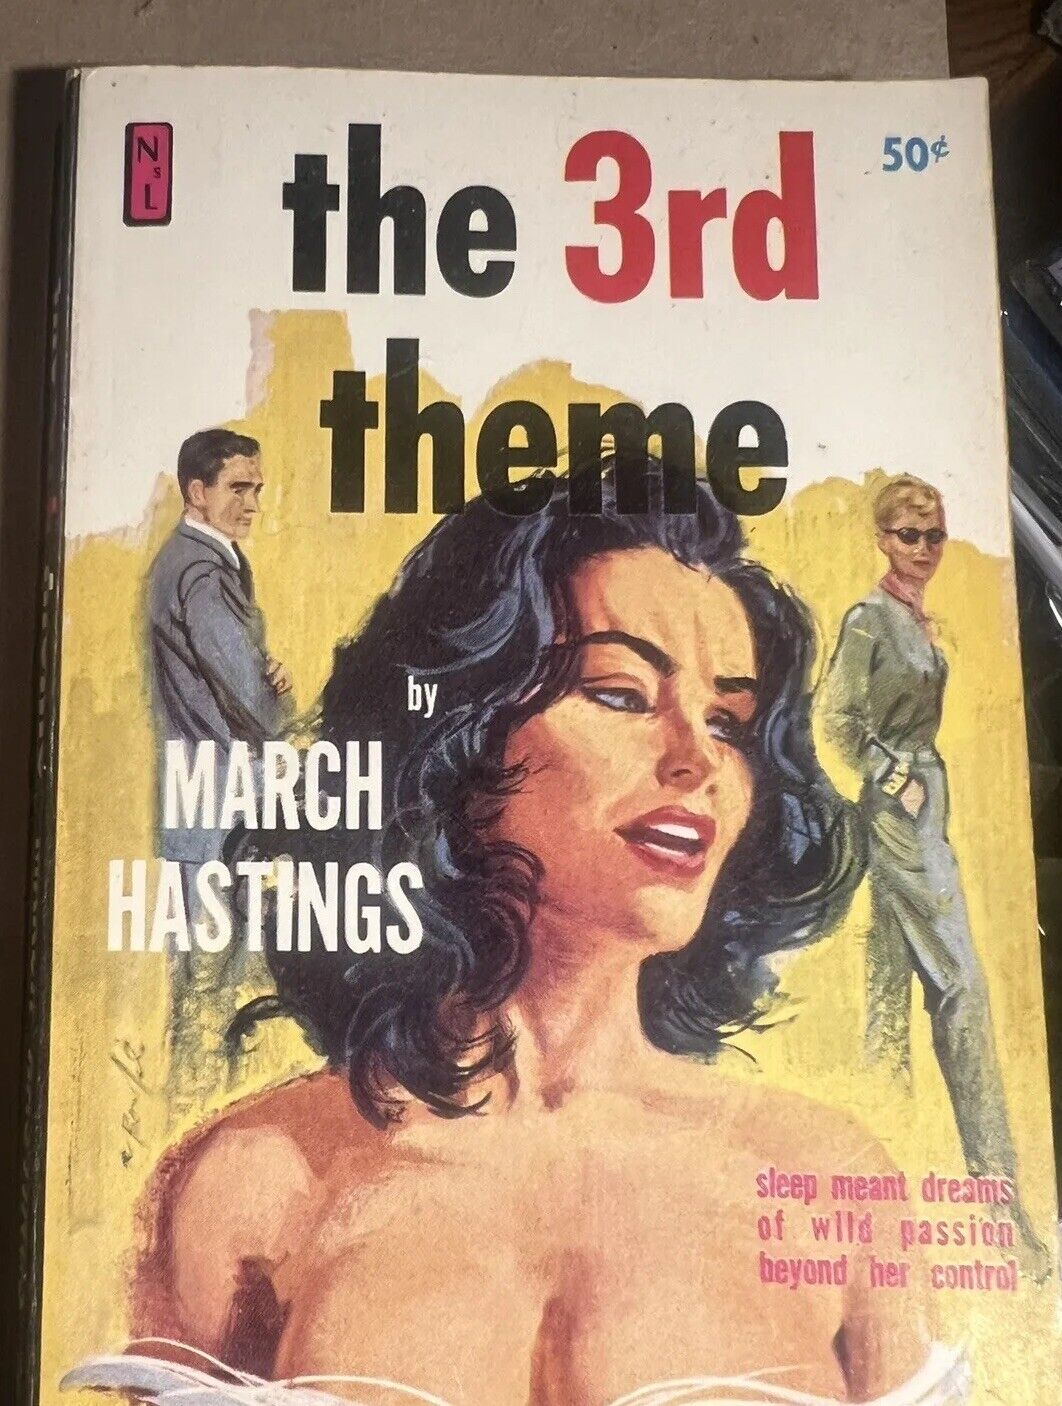 THE 3RD THEME 1961 MARCH HASTINGS NAT. LIBRARY  PULP NOVEL LGBTQ INTEREST RARE